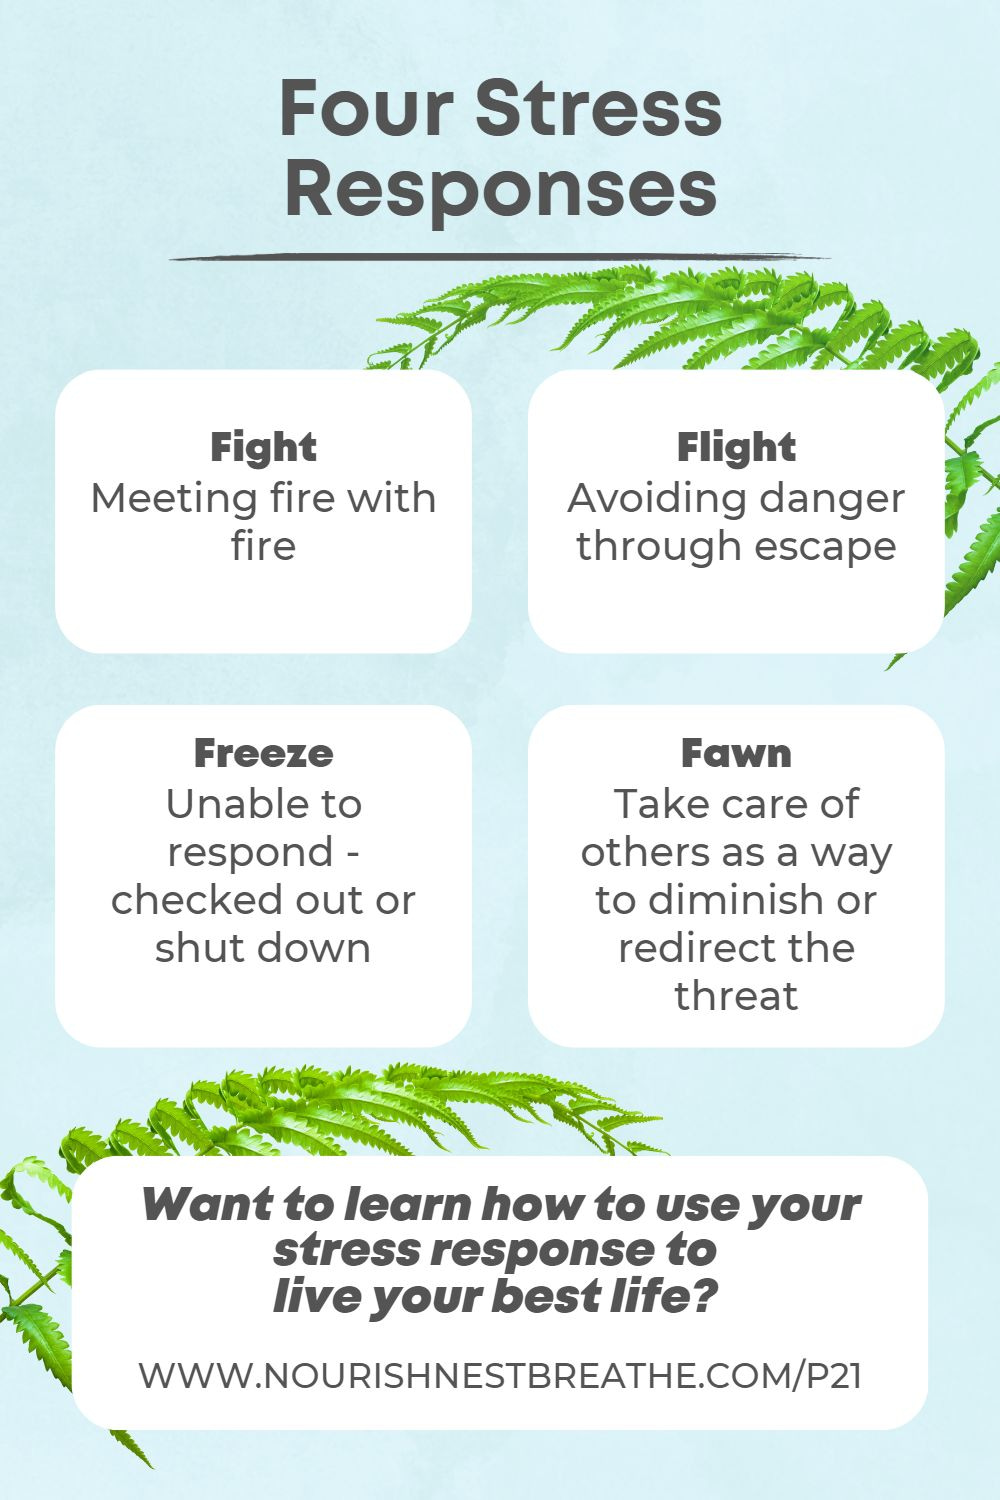 Four stress responses: Fight - meeting fire with fire. Flight - avoiding danger through escape. Freeze - unable to respond, checked out or shut down. Fawn - take care of others as a way to diminish or redirect the threat.